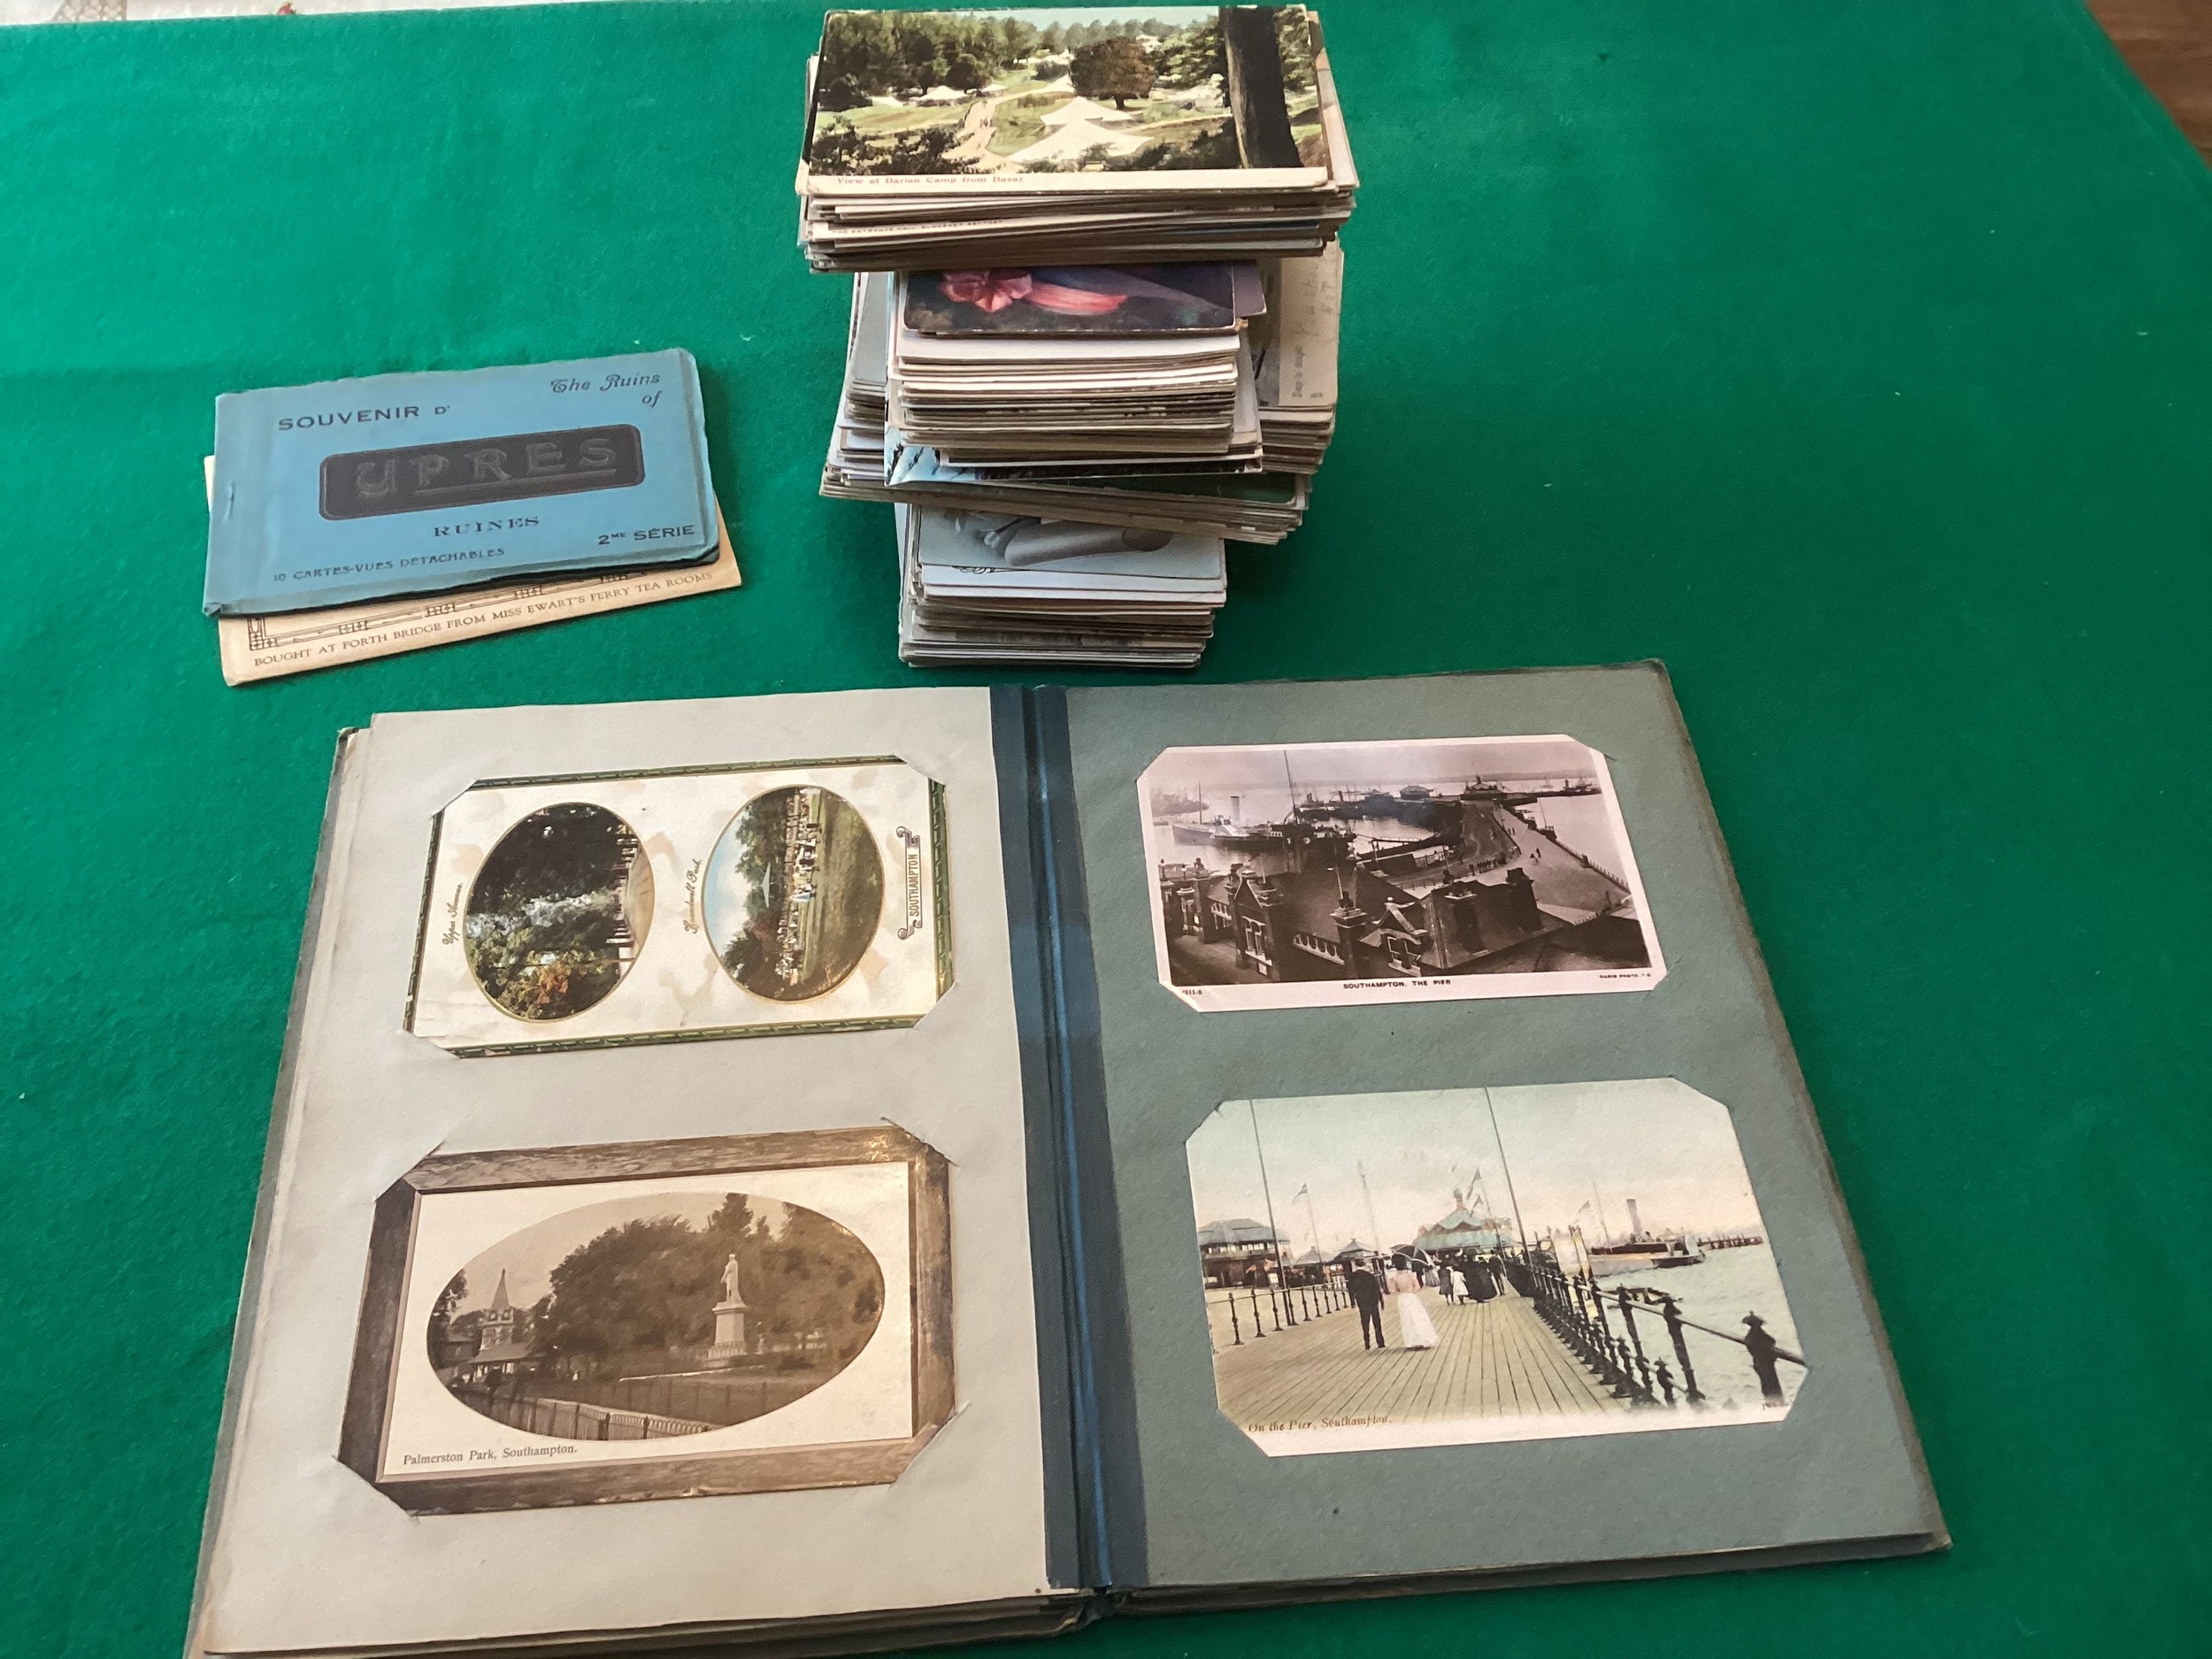 An album containing 32 standard-size Southampton cards; more than 350 loose standard-size